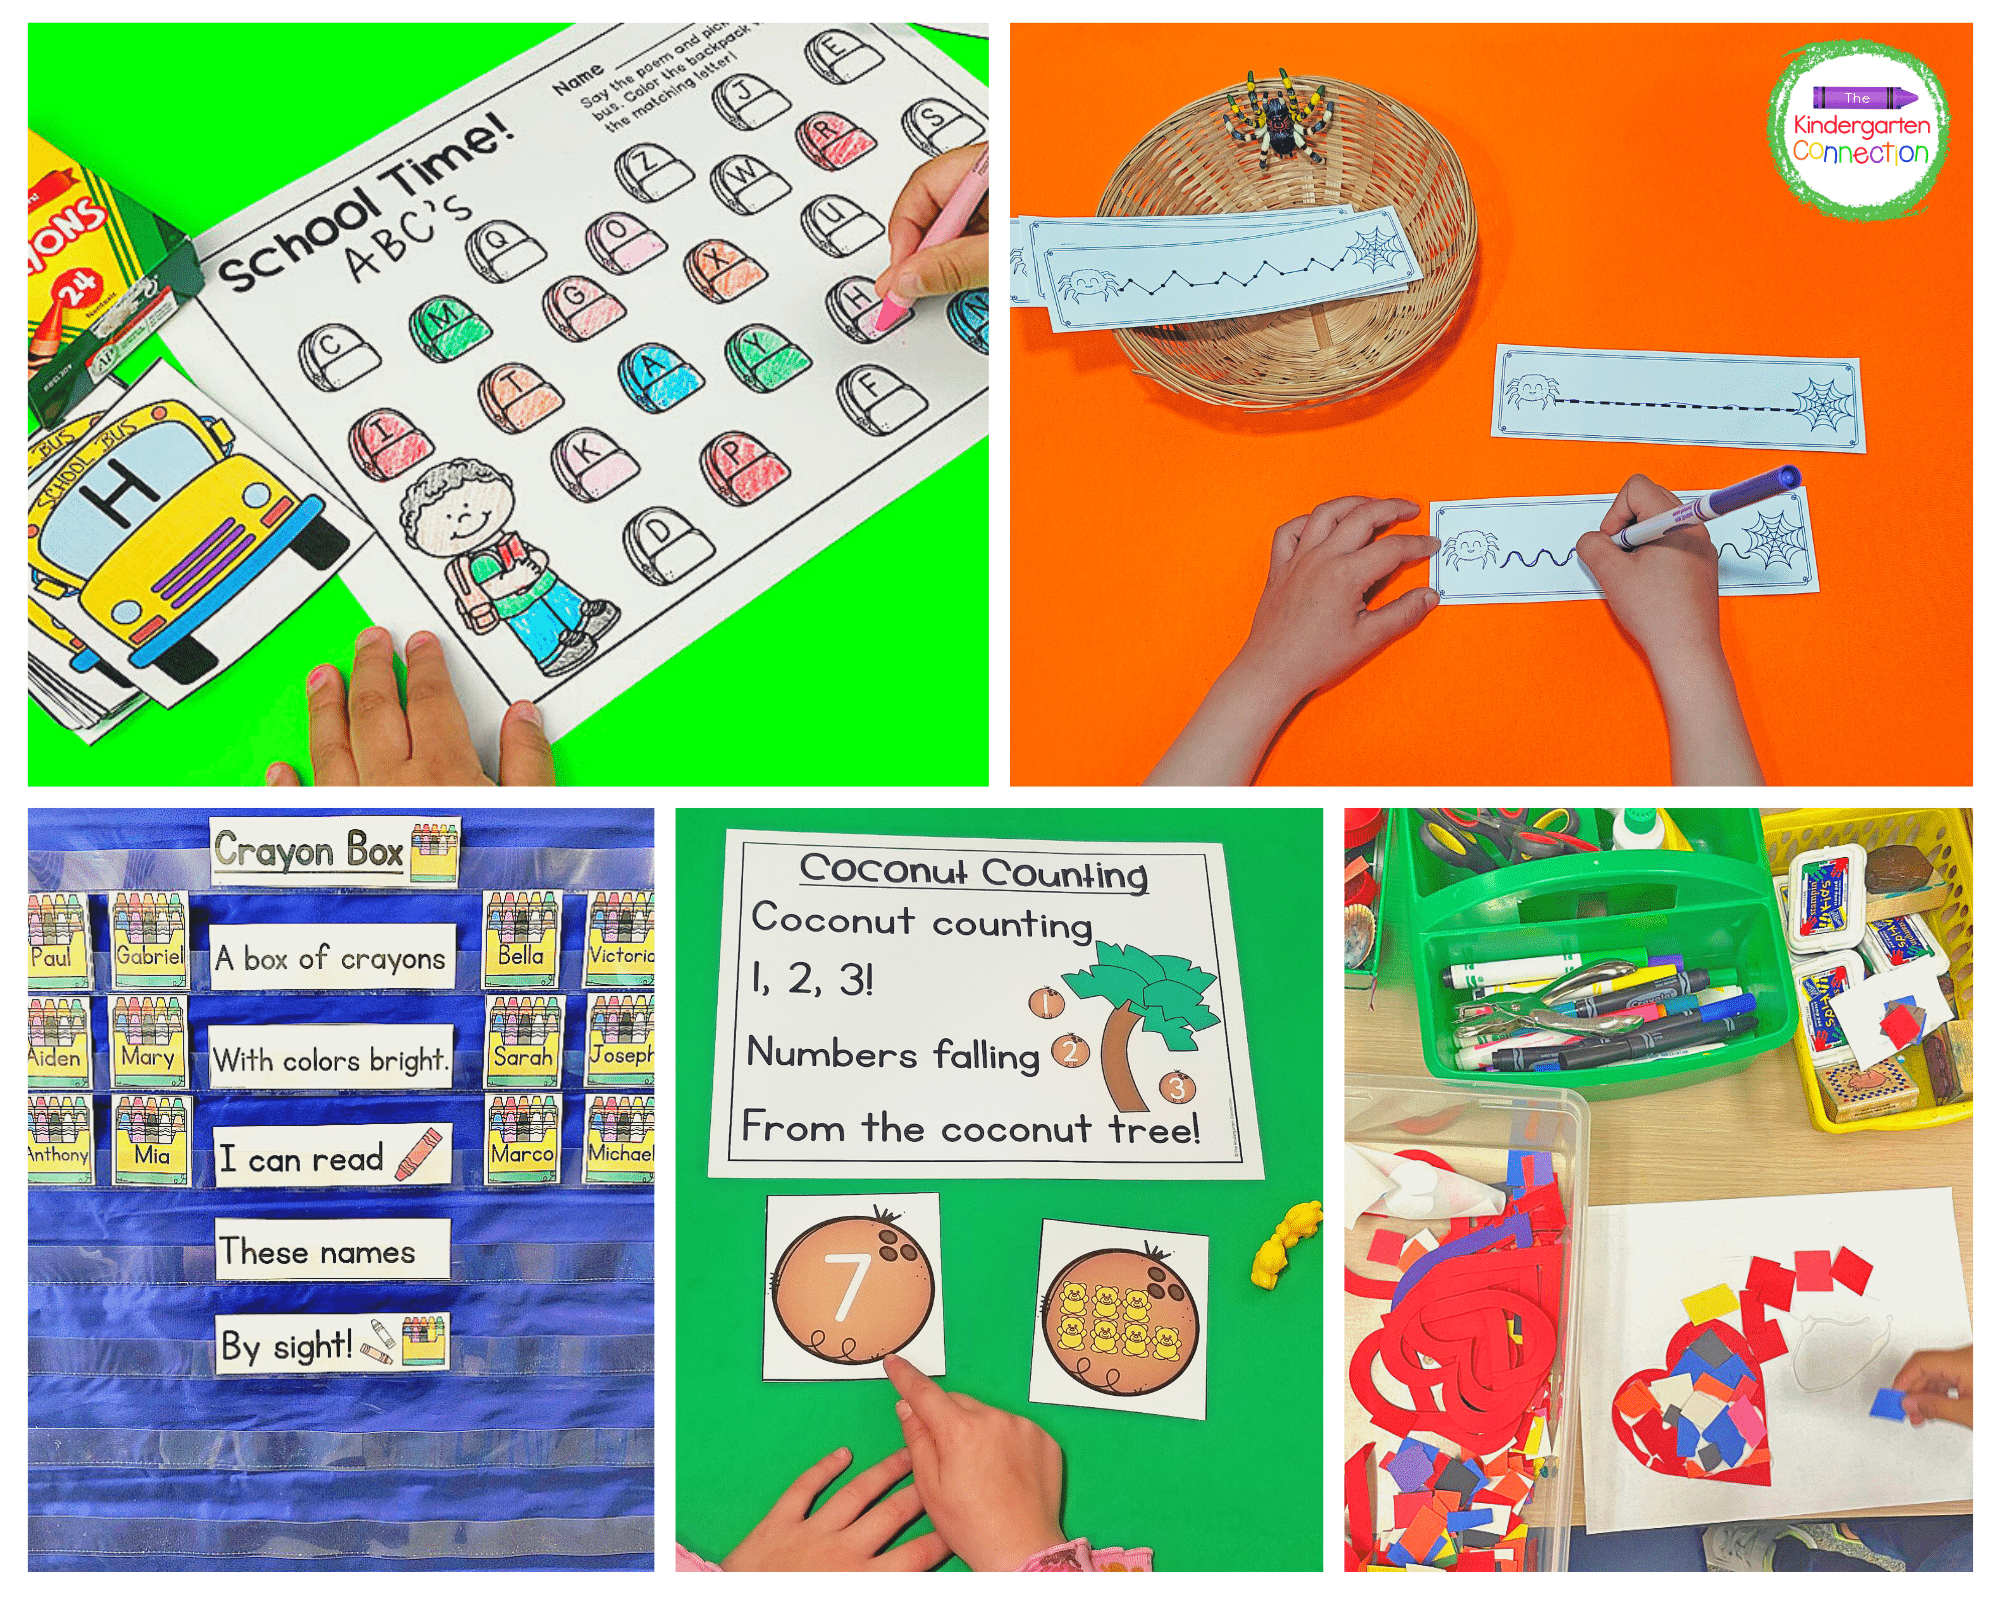 The Pre-K and TK Scope & Sequences contain lesson plans that are filled with easy prep activities.